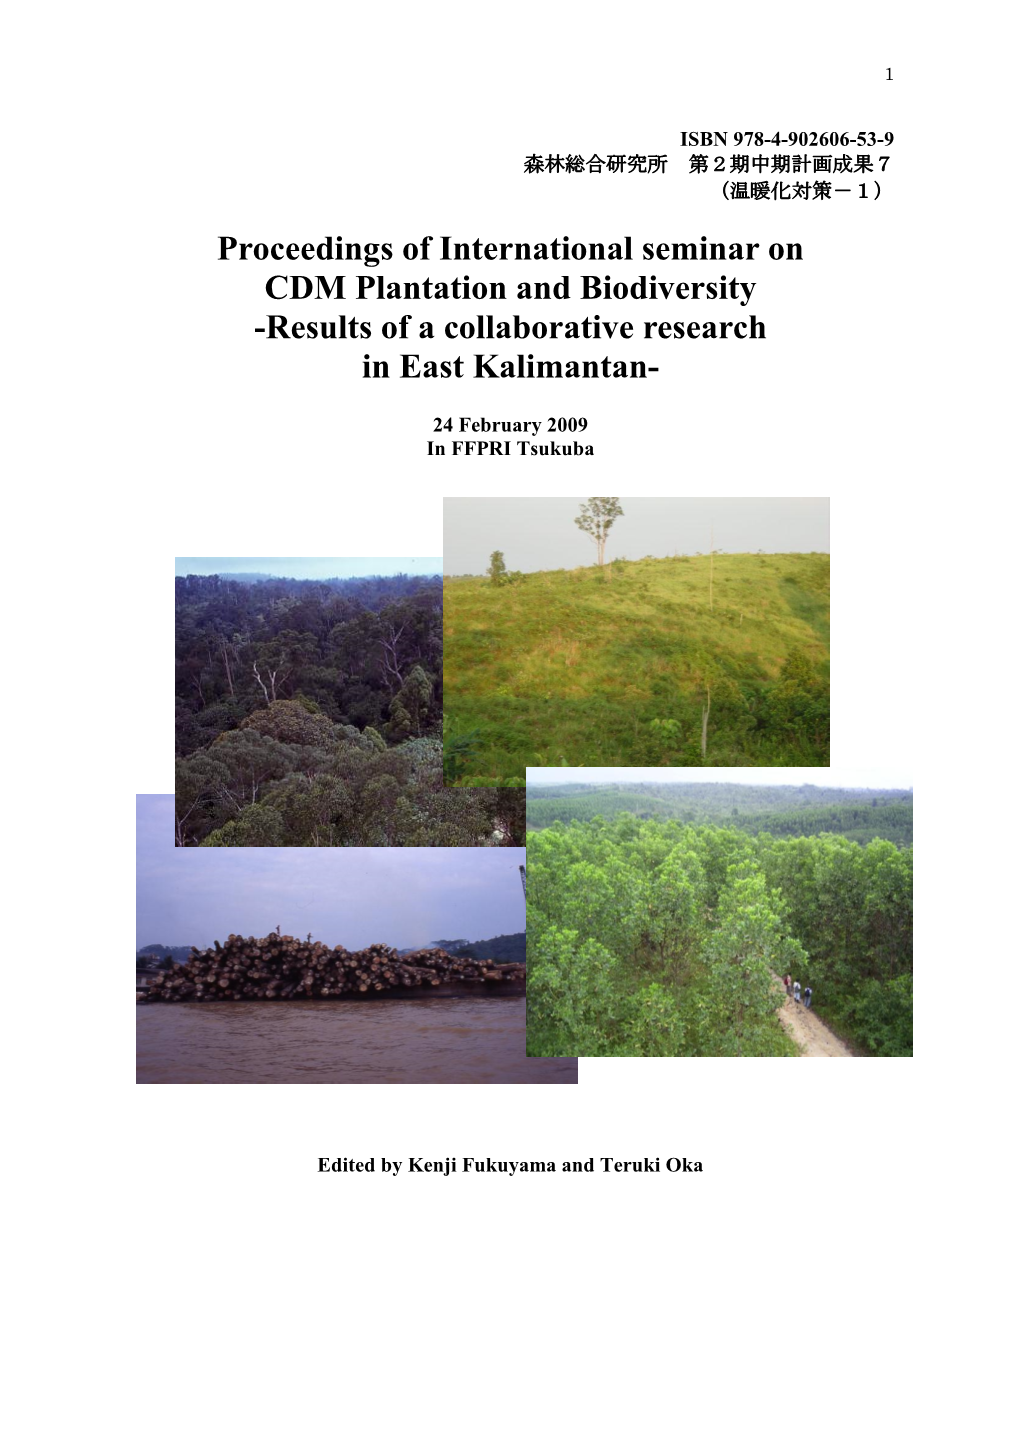 Proceedings of International Seminar on CDM Plantation and Biodiversity -Results of a Collaborative Research in East Kalimantan